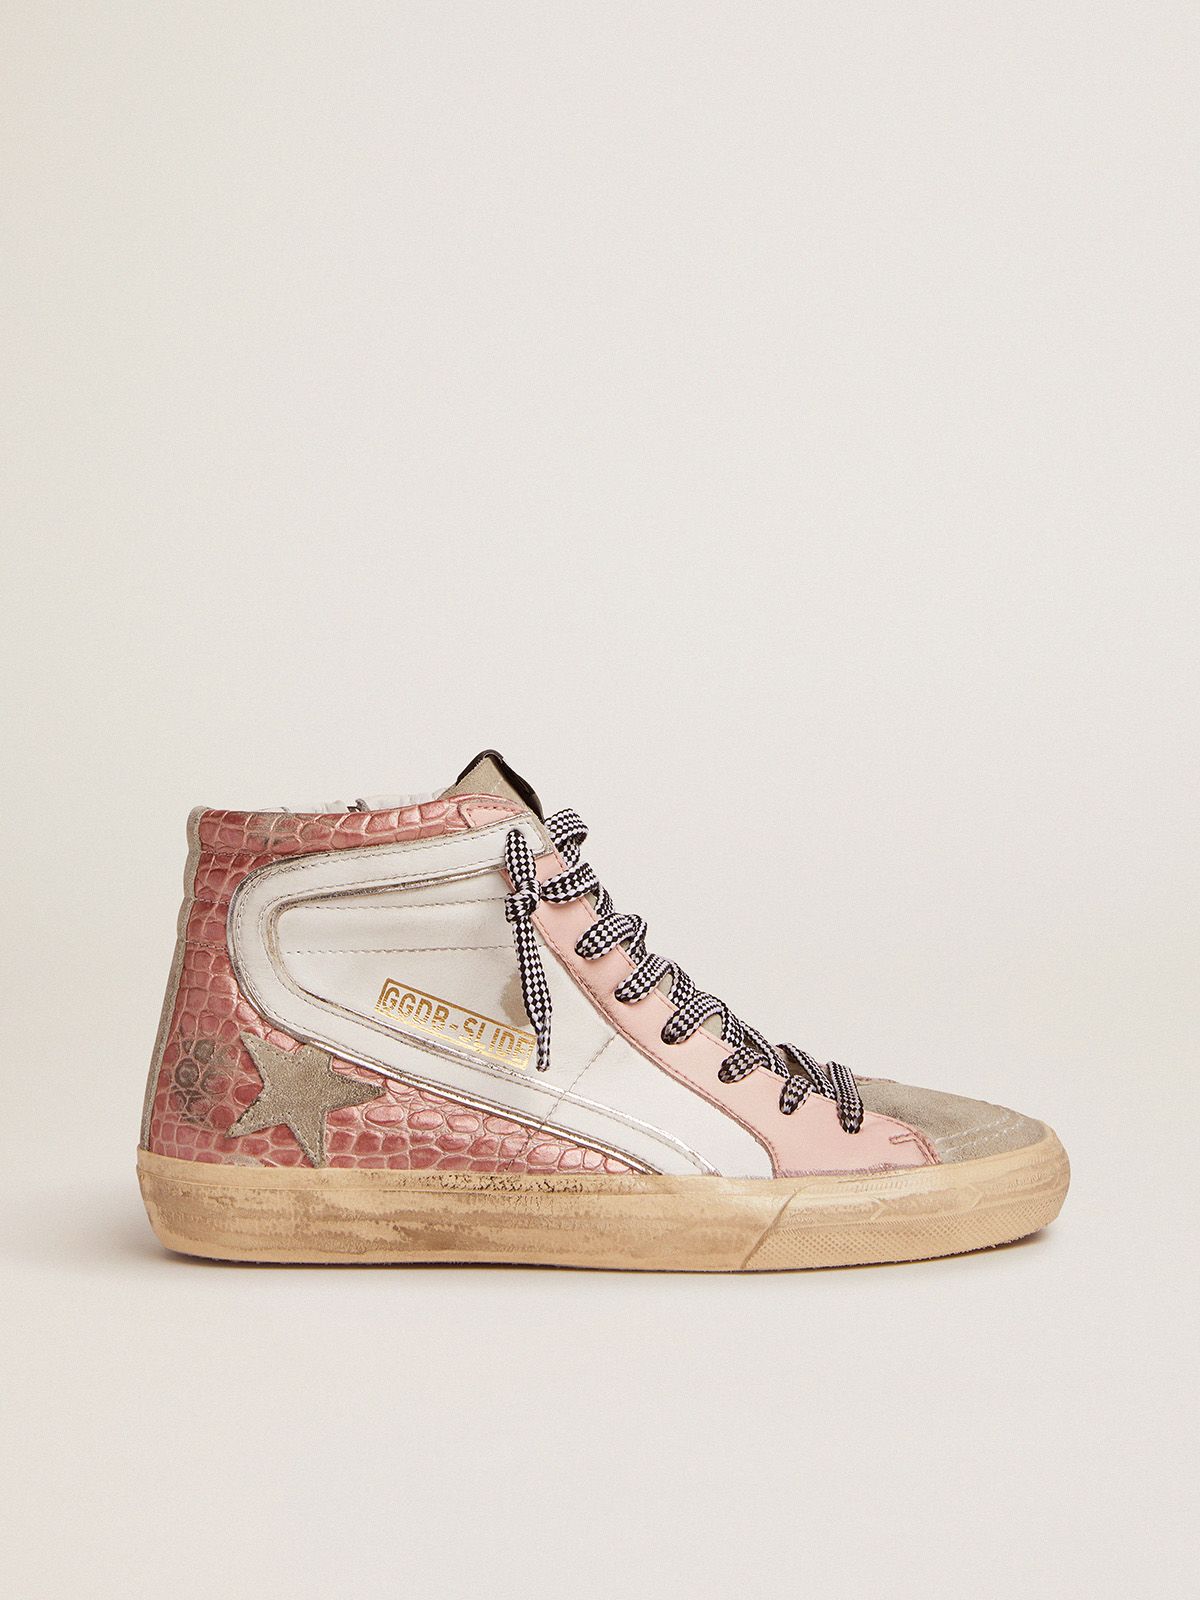 Slide sneakers with white leather and pink crocodile-print leather upper | 